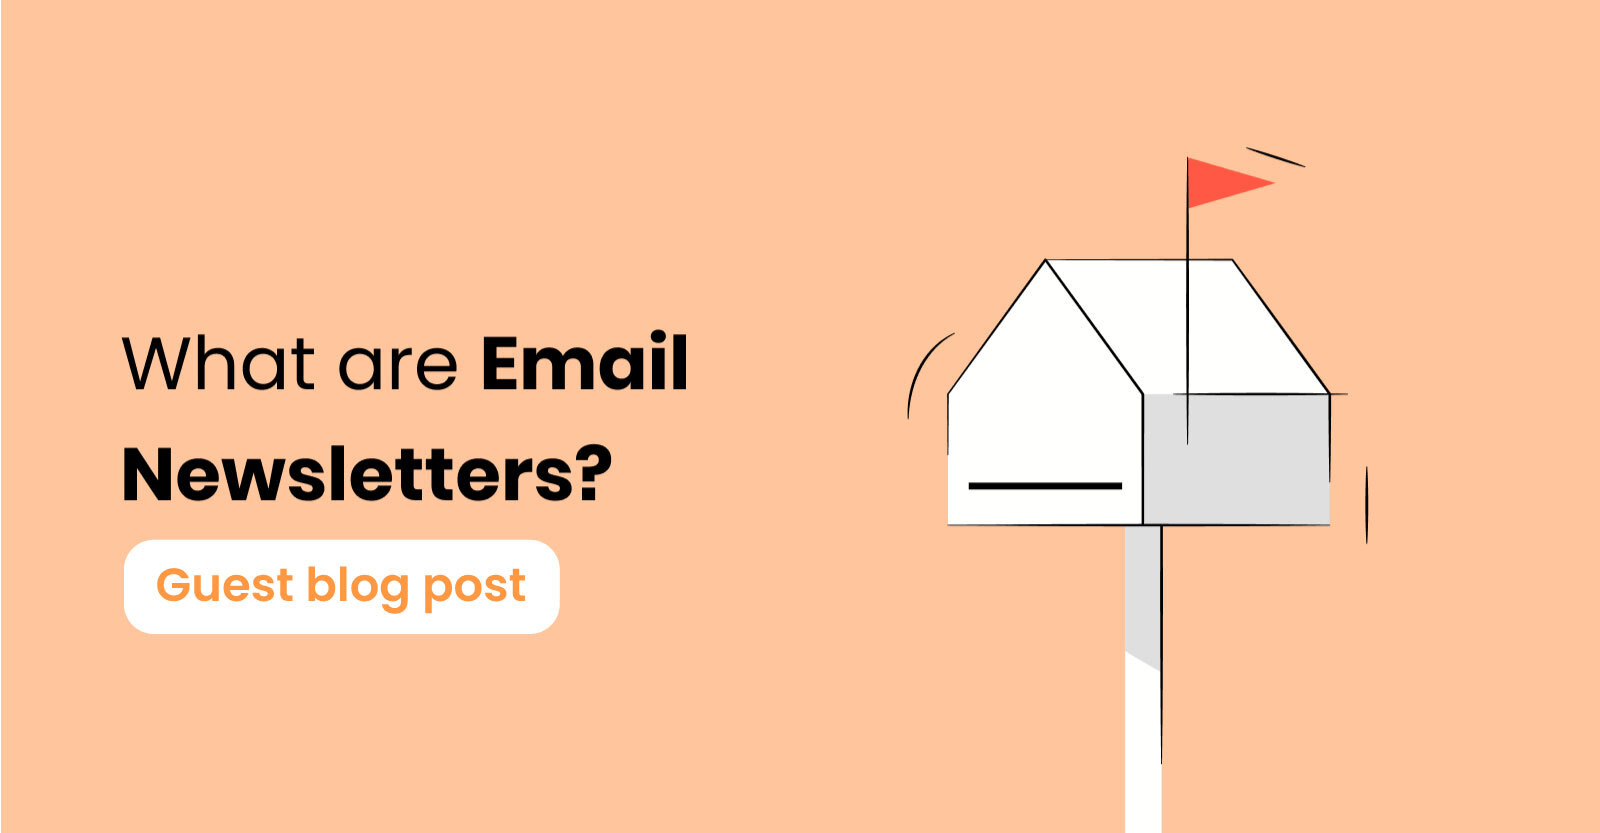 shopify email newsletters